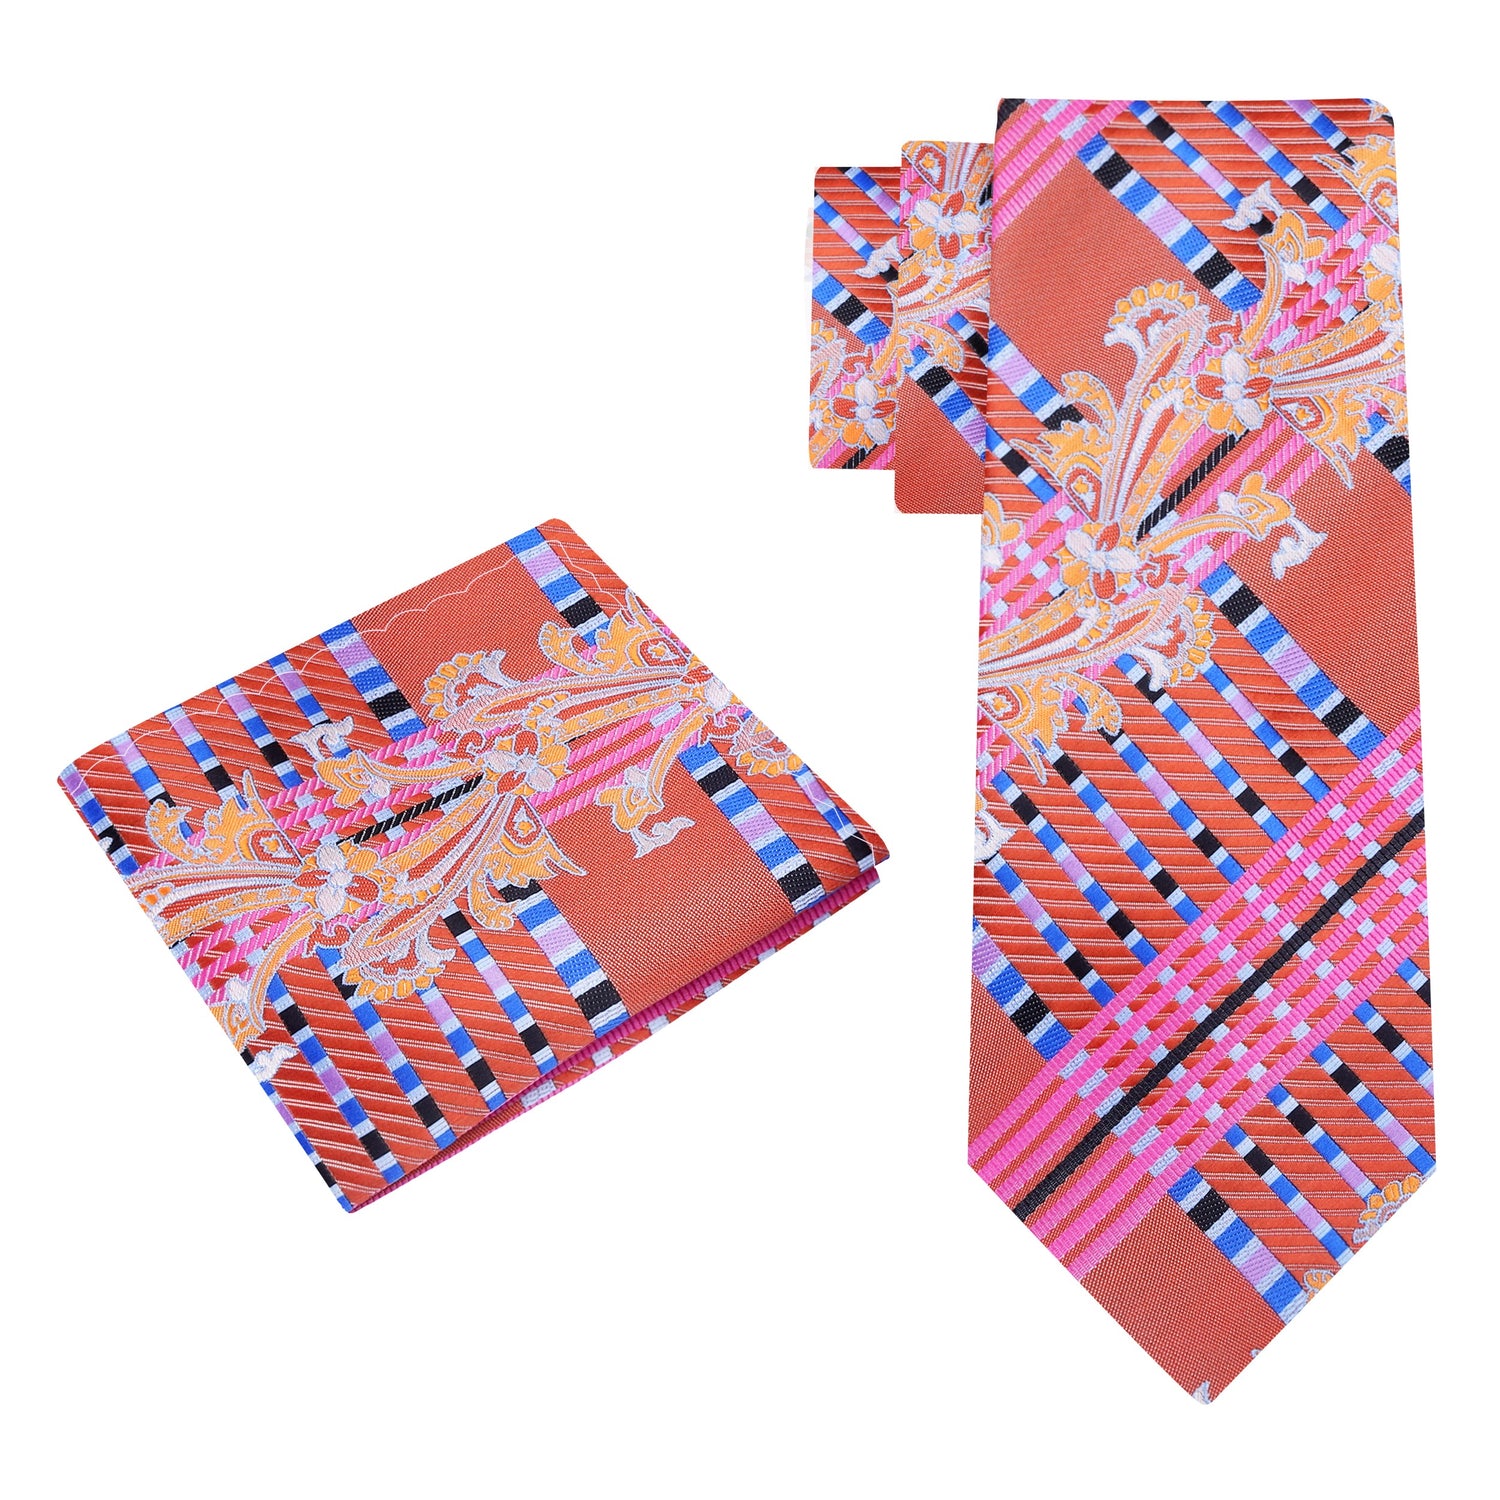 Alt View: A Peach, Orange, Blue Intricate Abstract Floral Pattern Silk Necktie, Matching Pocket Square